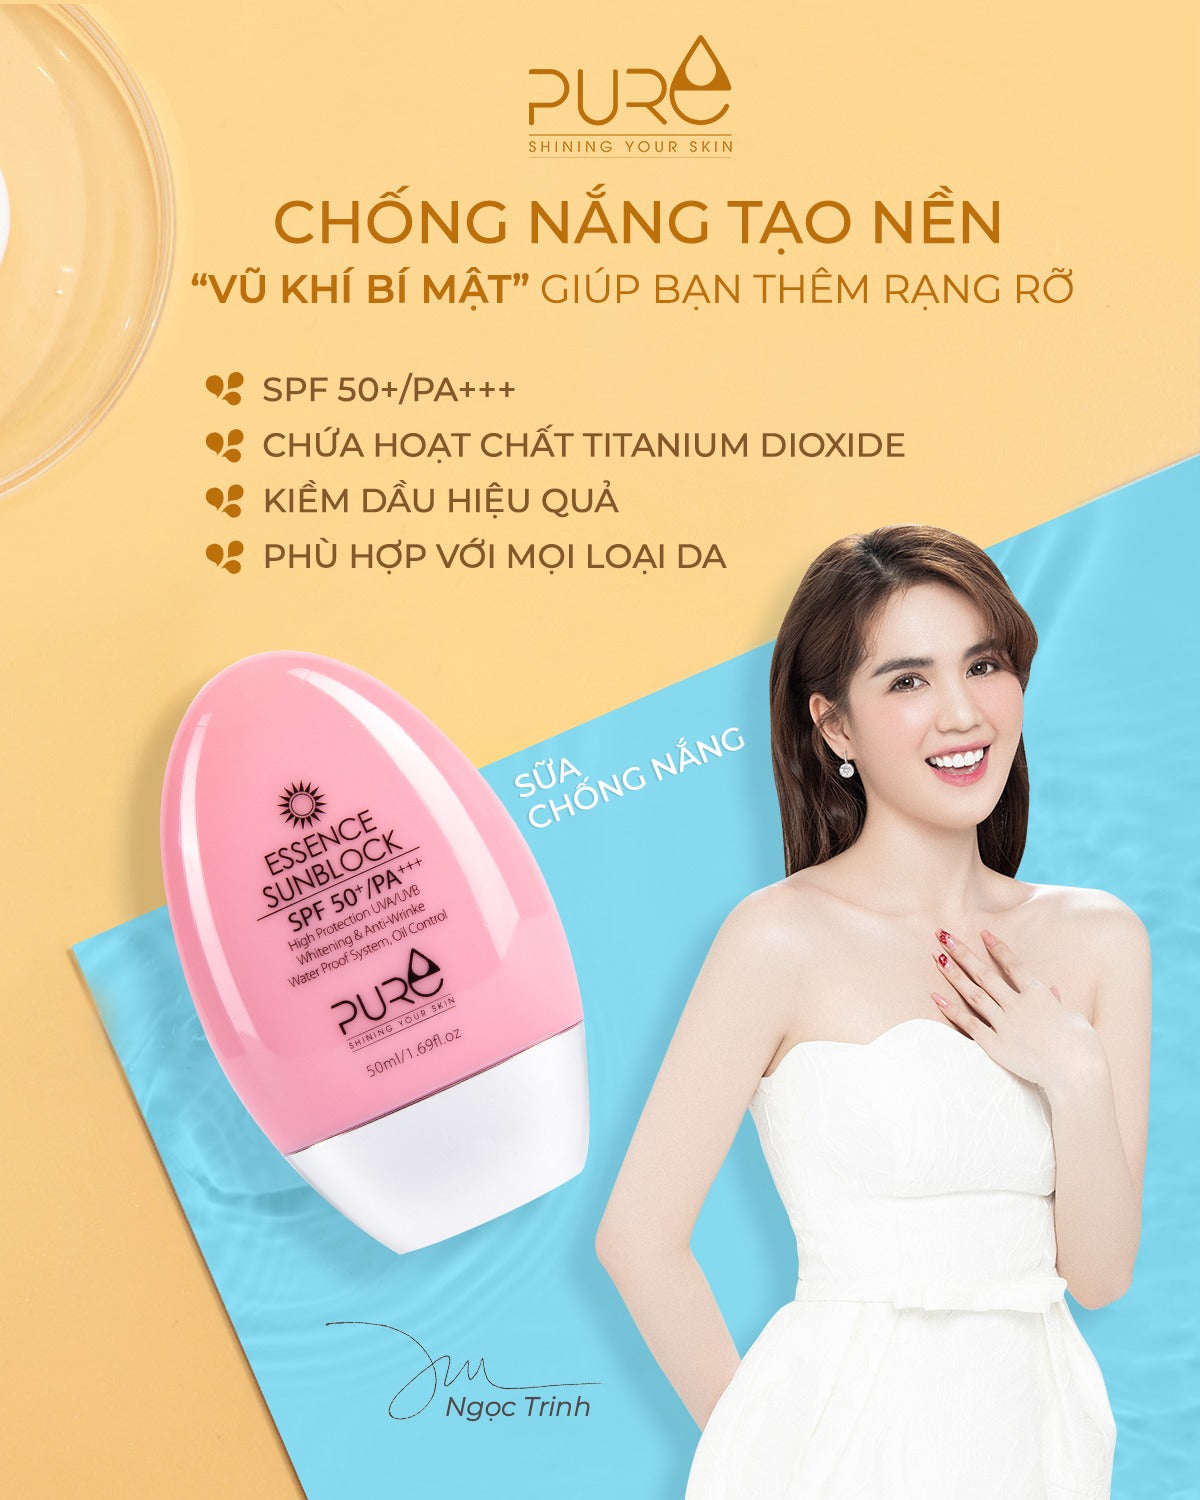 PURE Essence Sunblock - Sữa chống nắng